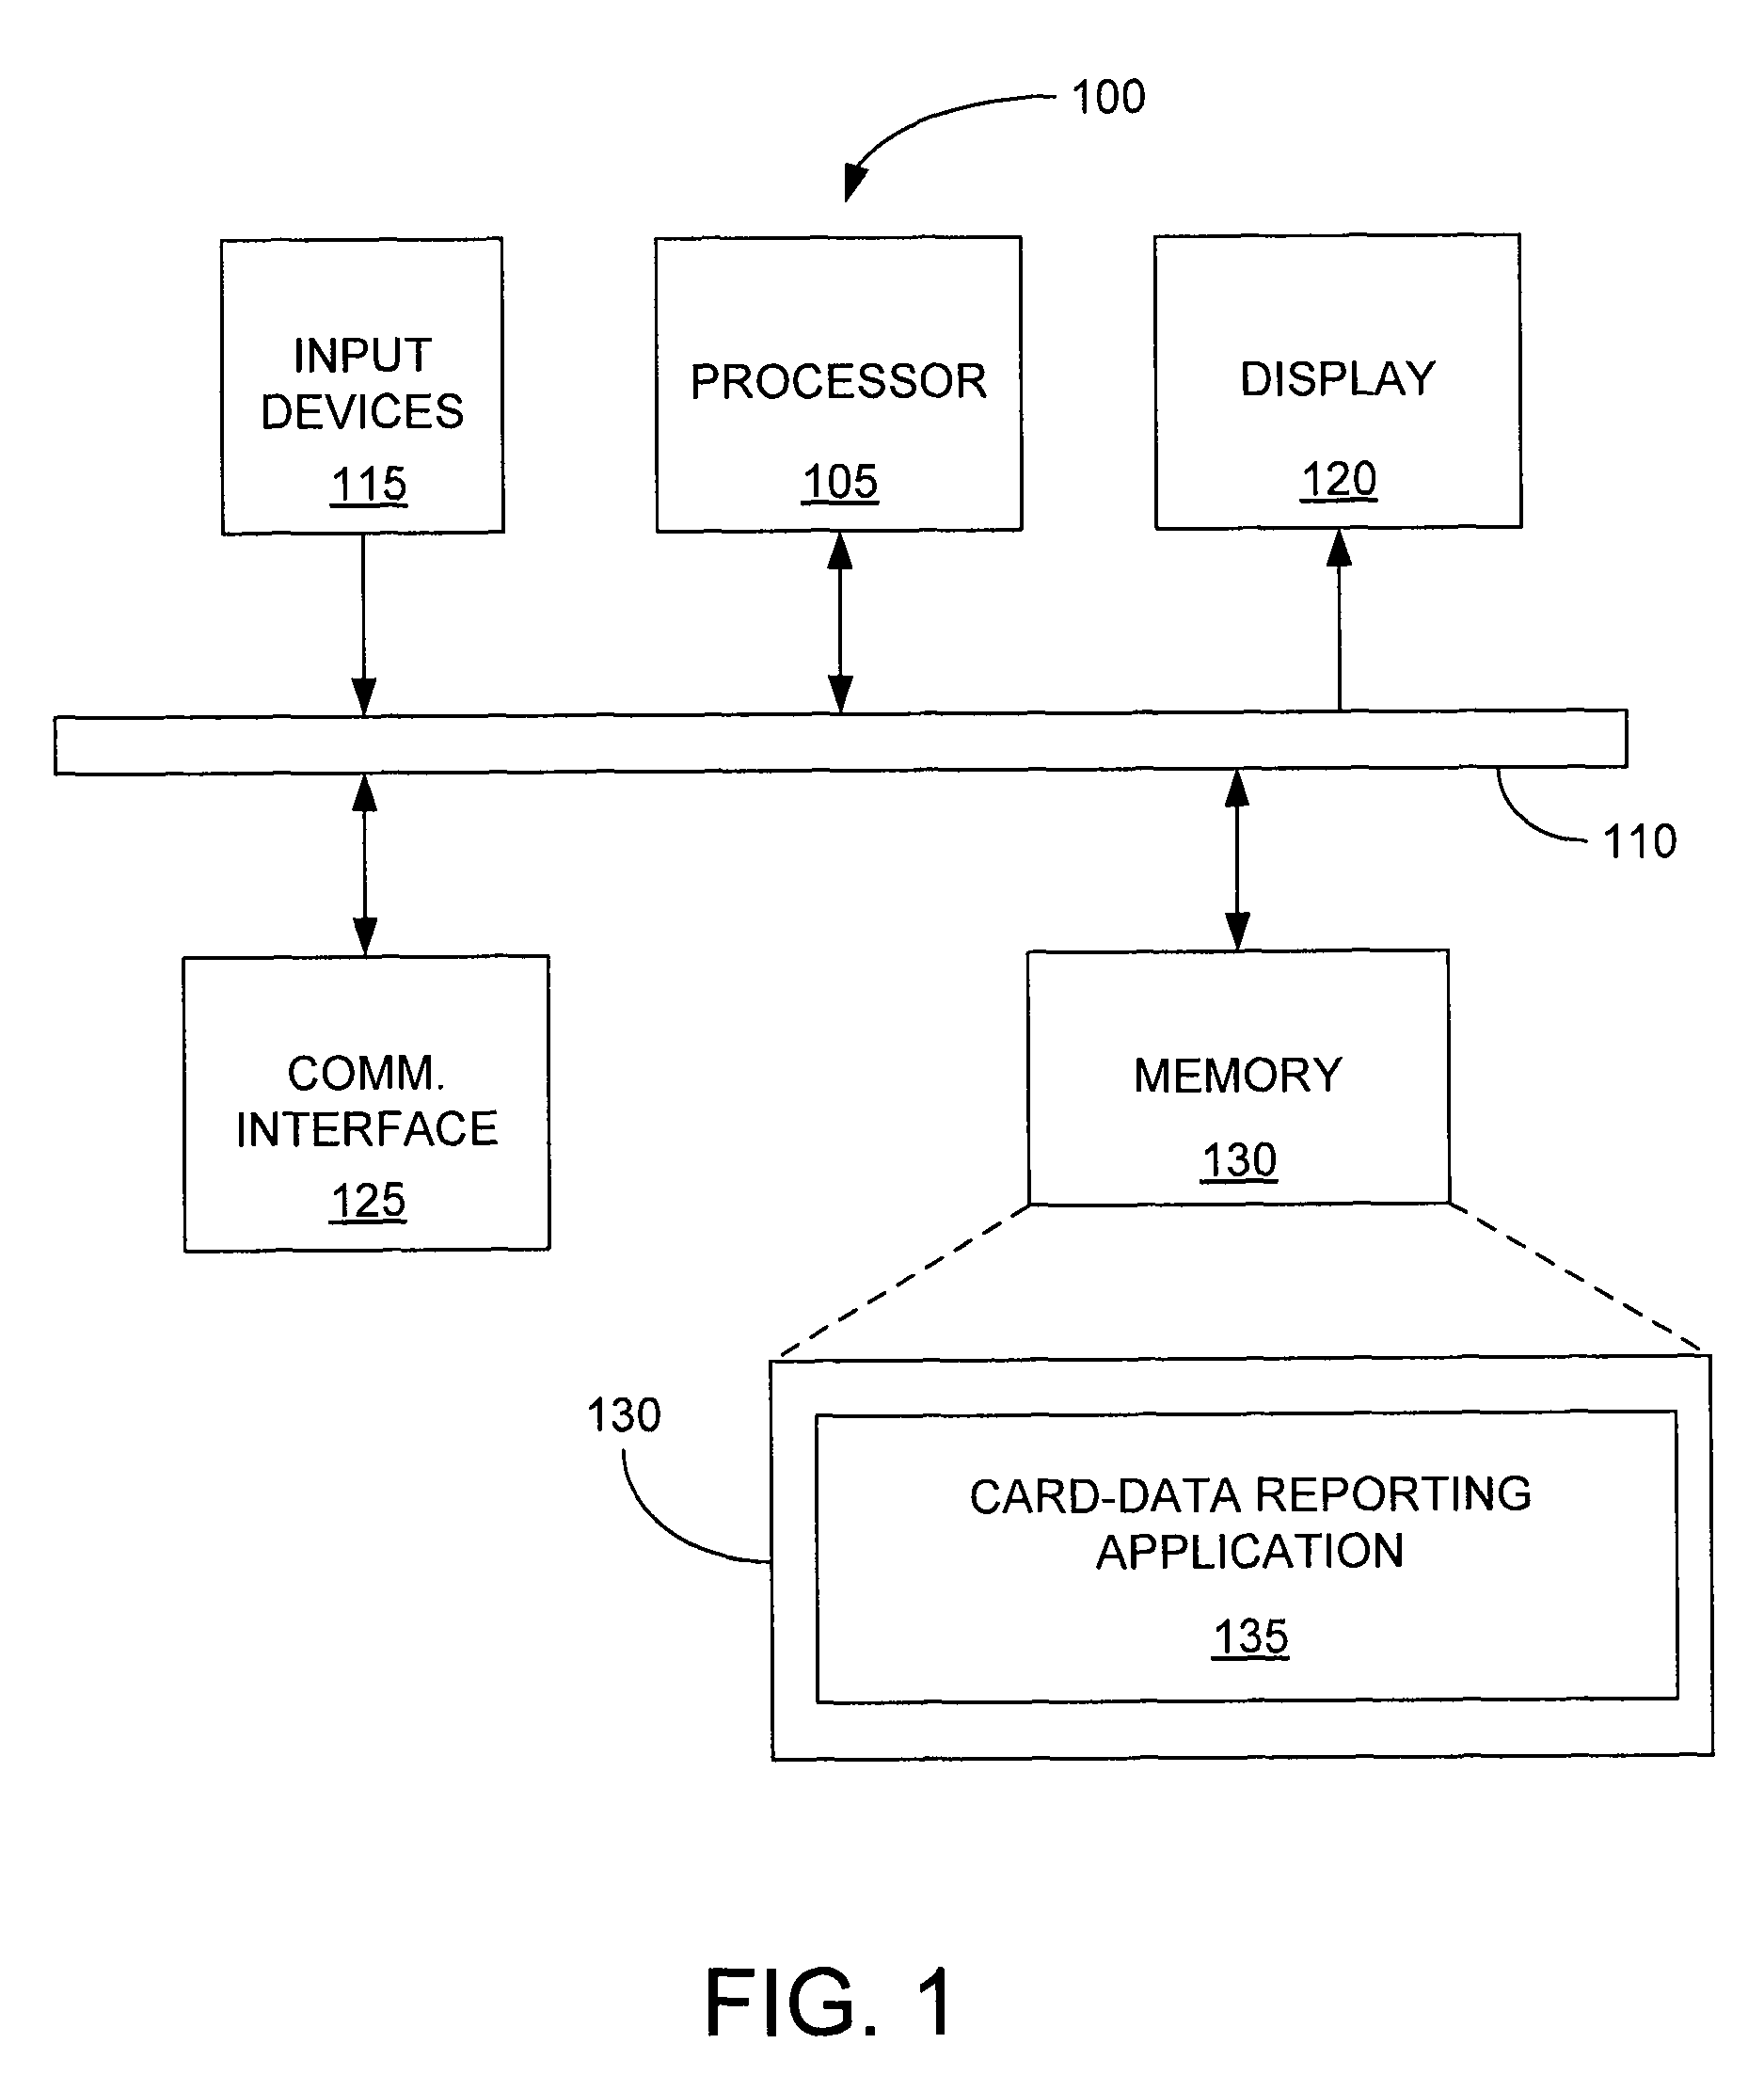 Method and system for gathering and reporting data associated with a cardholder's use of a prepaid debit card